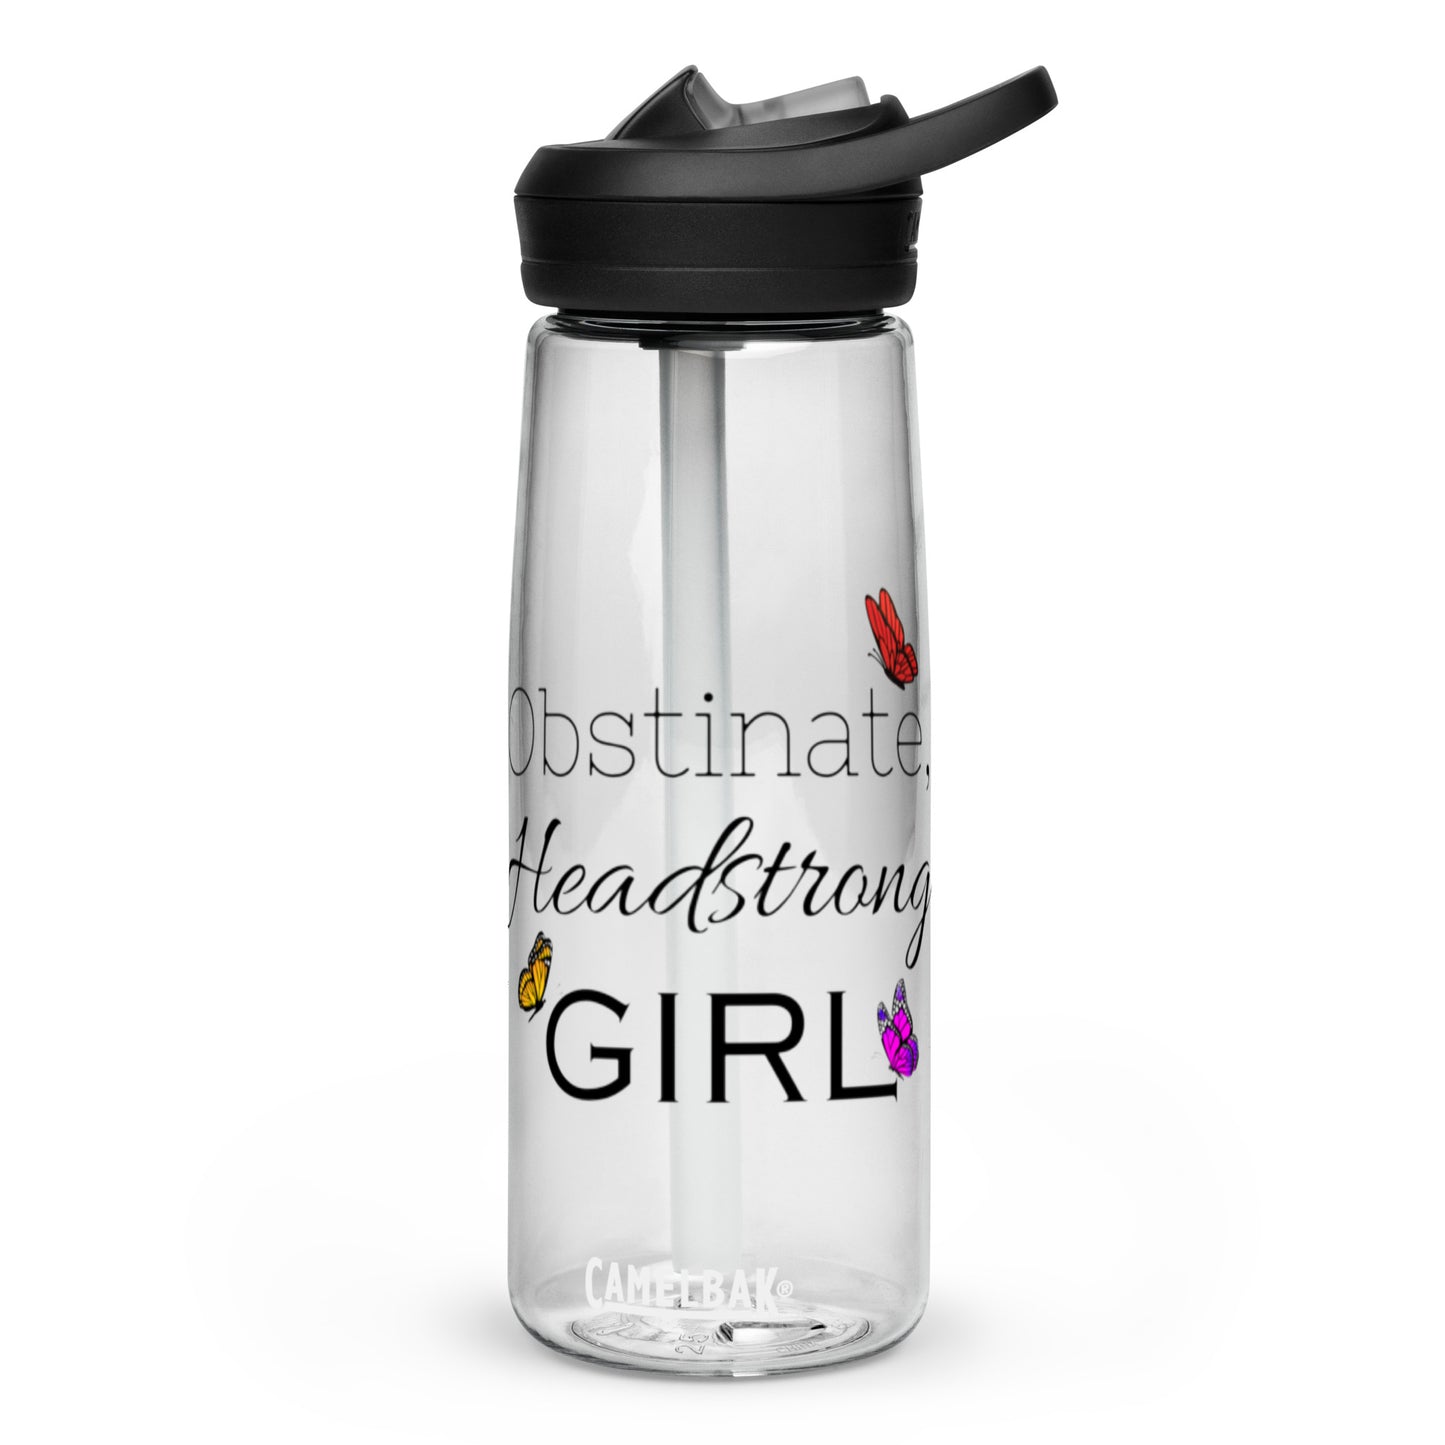 Obstinate, Headstrong Girl Sports water bottle